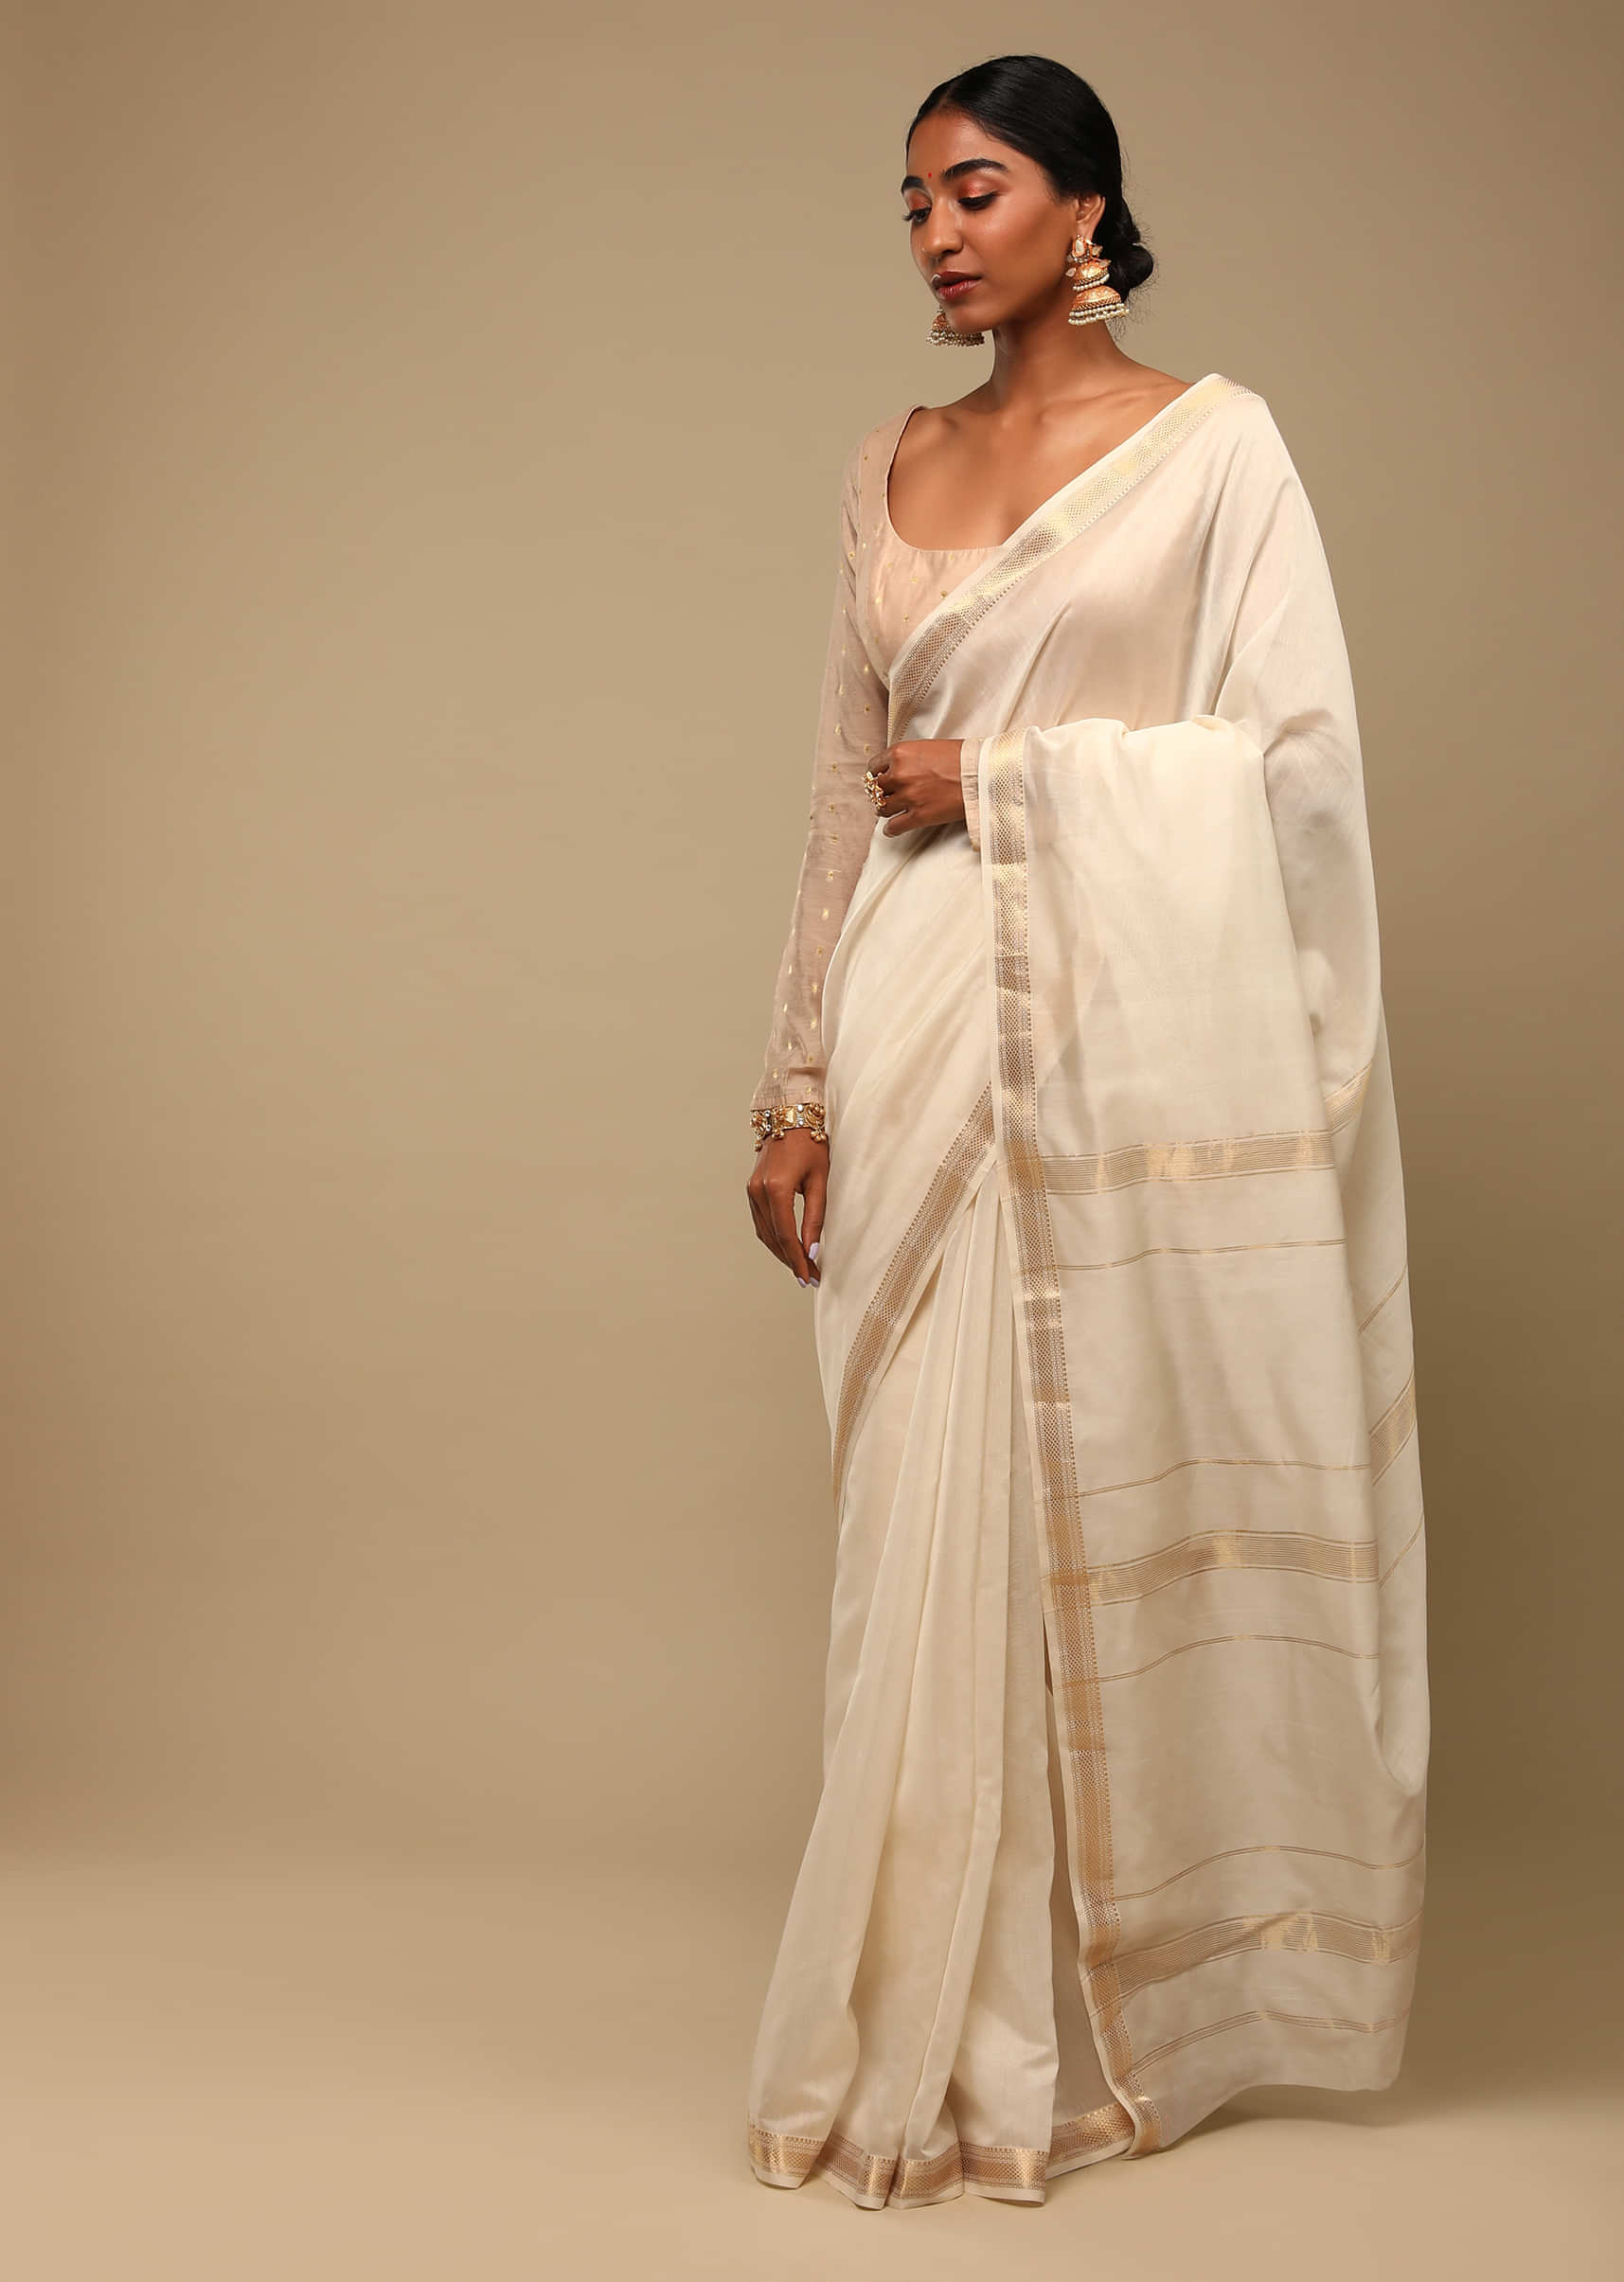 Powder White Saree In Cotton Silk With Woven Golden Stripe Detailing And Unstitched Blouse  